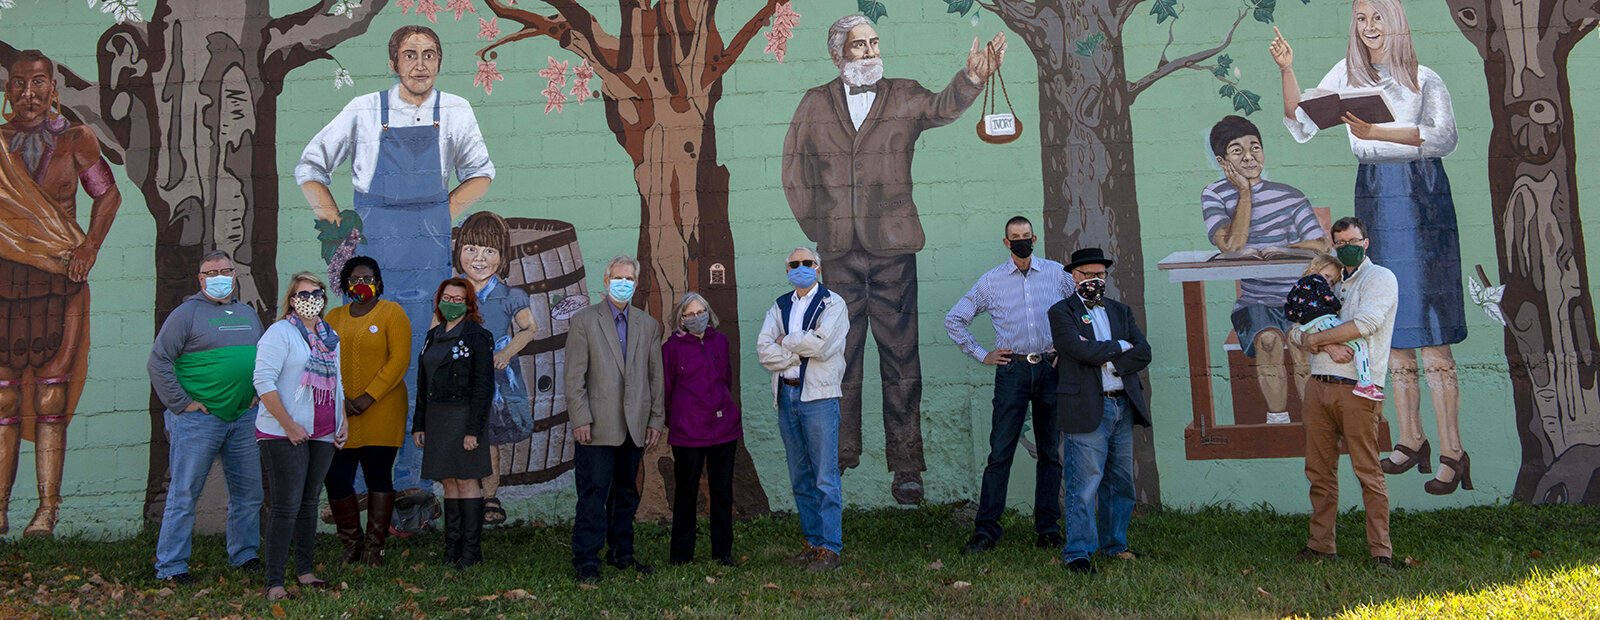 Westwood community organizers in front of the mural that started it all: John Eby, Jess Thayer, Portia Schandorf, Leslie Rich, Greg Kissel, Liz Kissel, Bill Fussinger, Dan Owens, Greg Hand, and Tom Sauter.